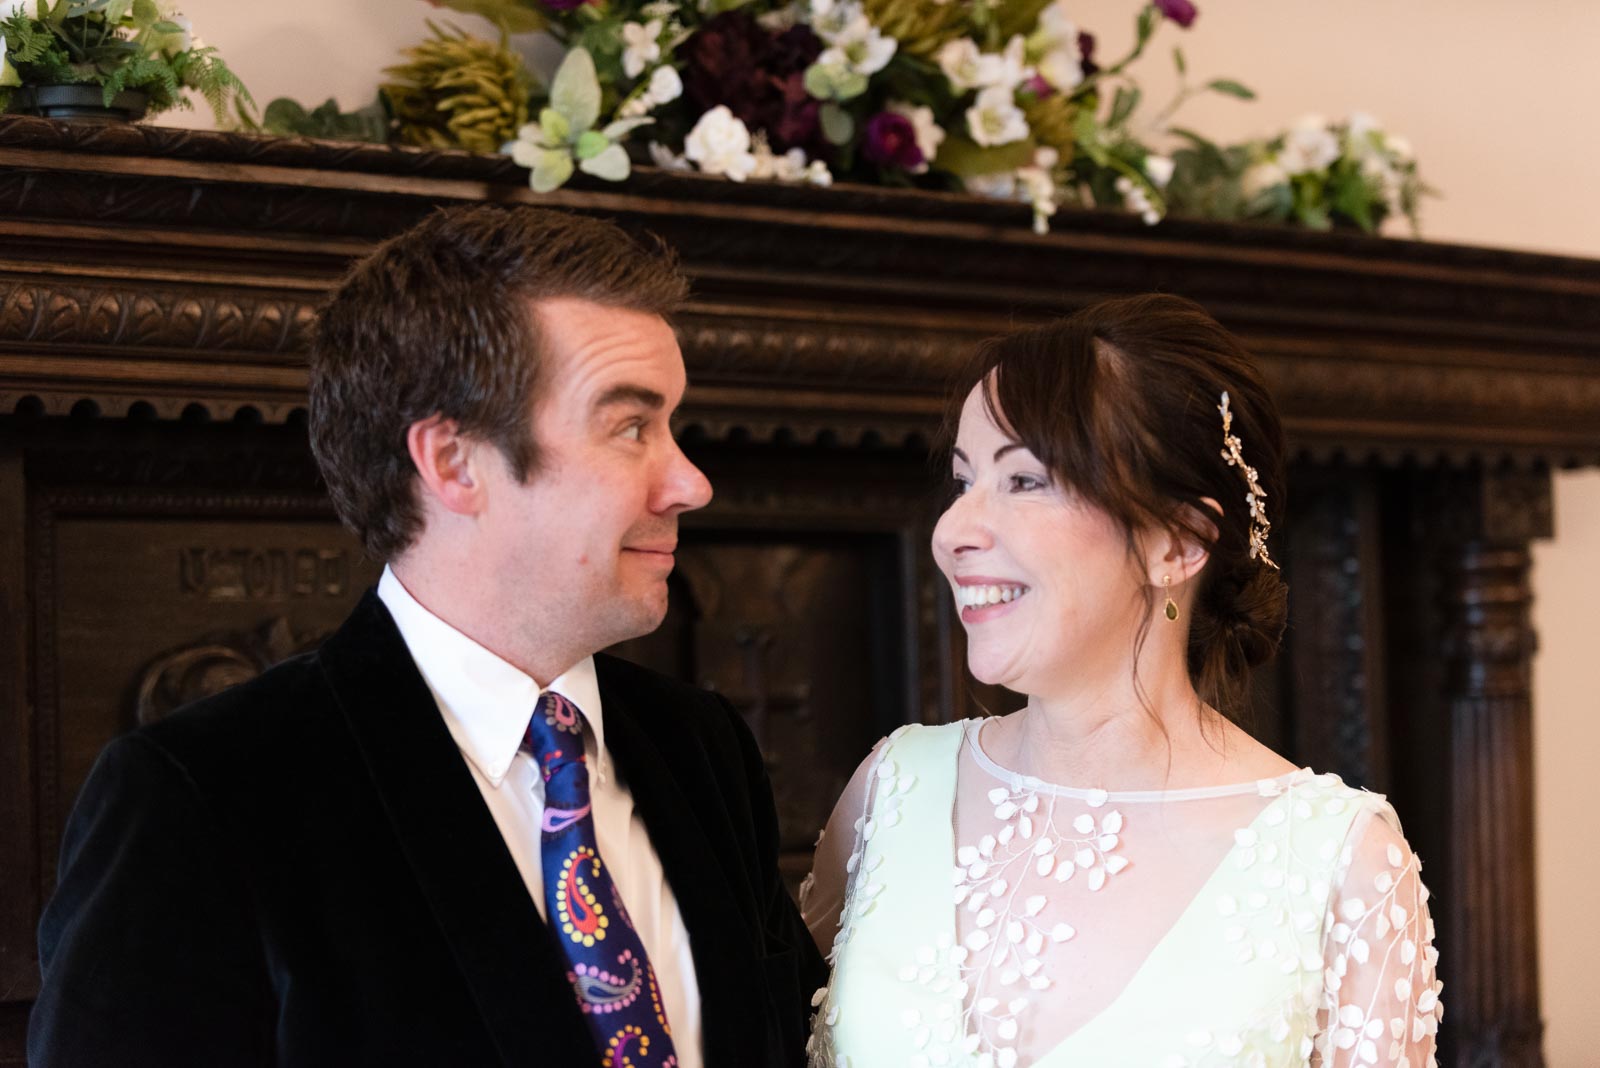 Fiona and Richard smile at each other during their wedding at Lewes Register Office.